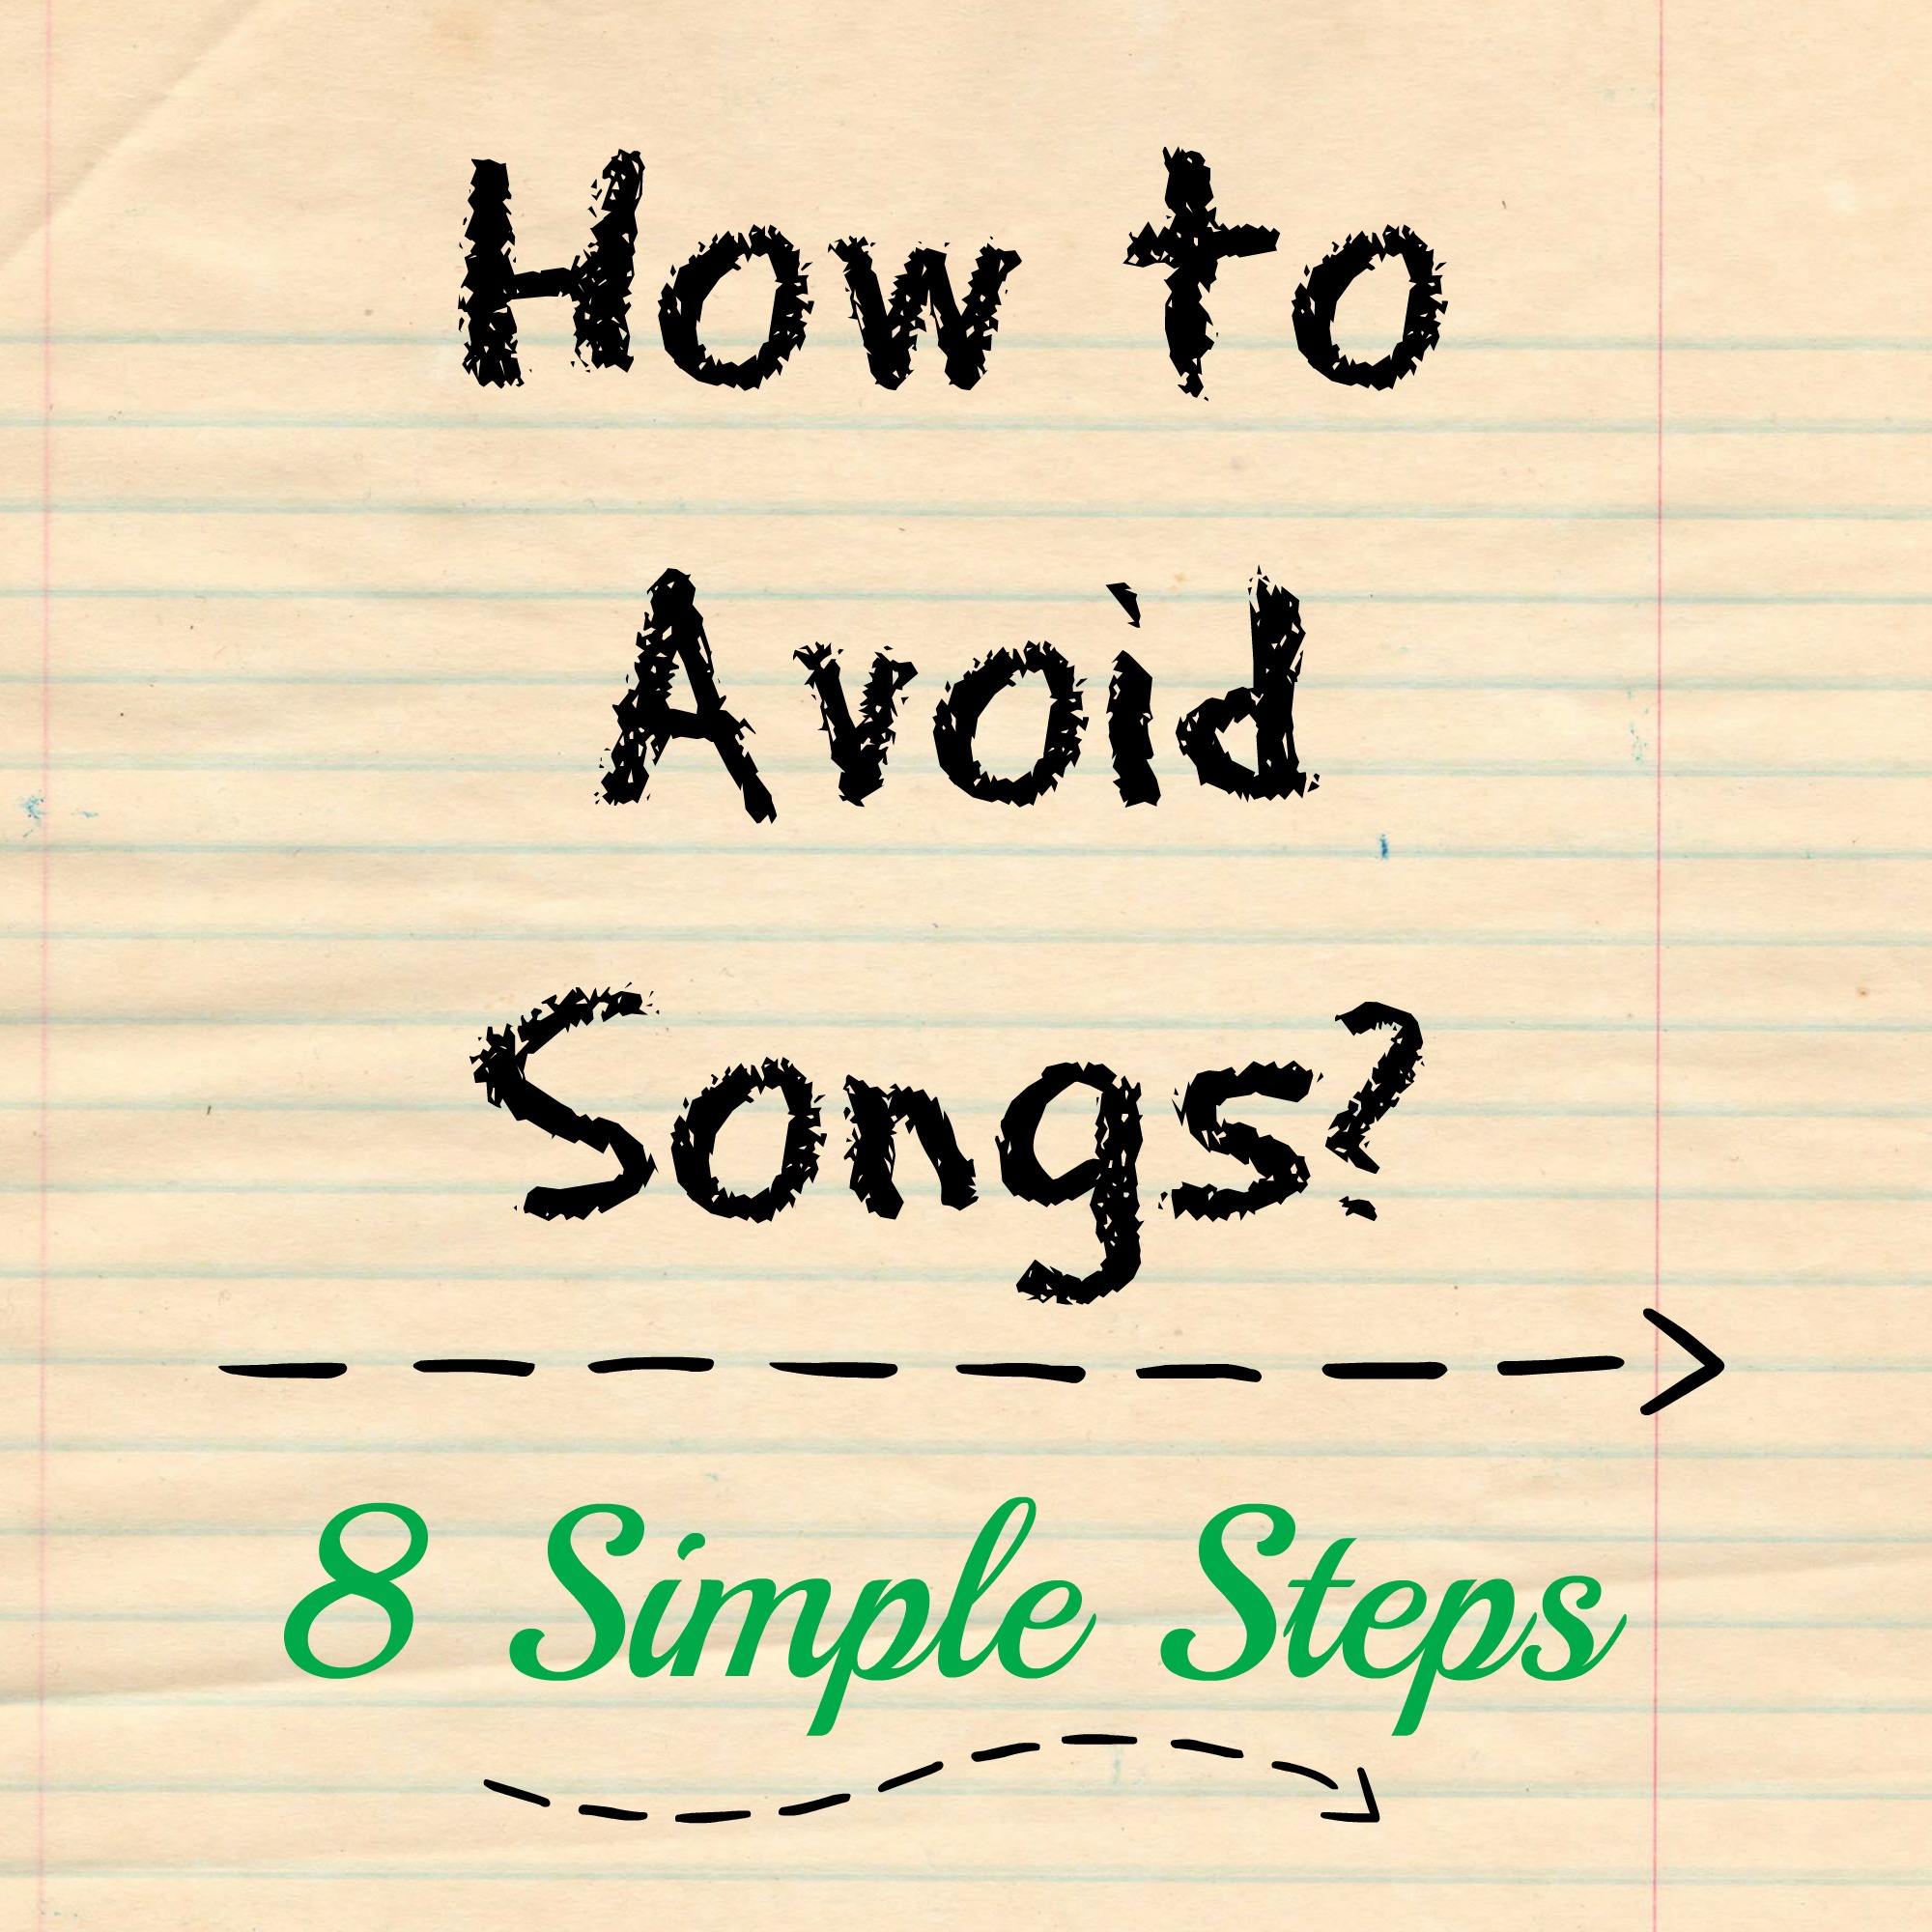 Challenge Guidelines and Tips on Avoiding Songs